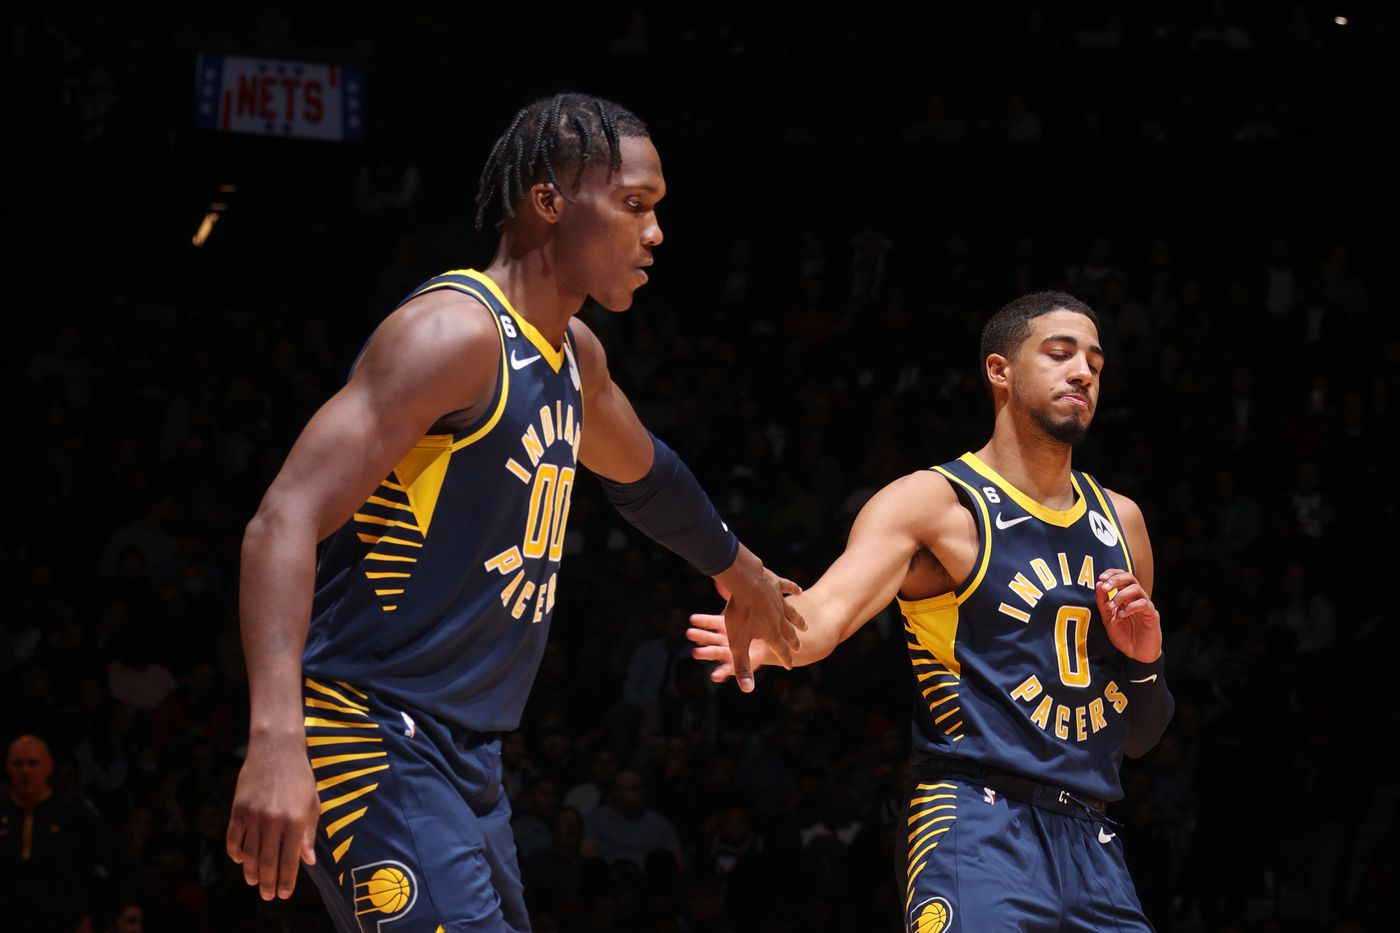 Indiana Pacers - It's the final week to enter to win a signed